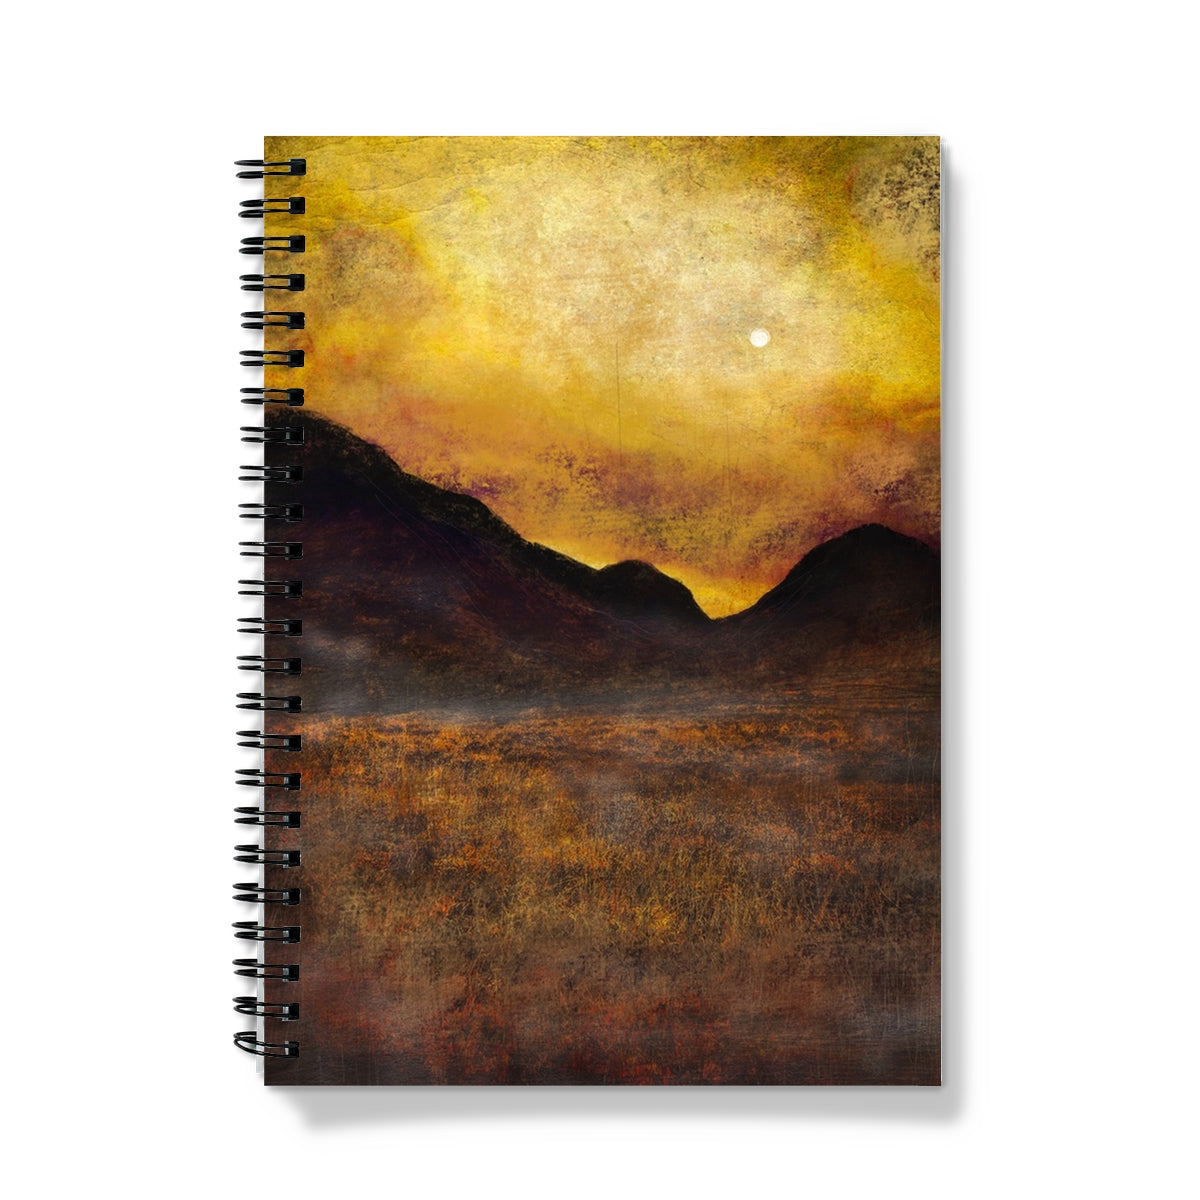 Glencoe Moonlight Art Gifts Notebook-Journals & Notebooks-Glencoe Art Gallery-A5-Lined-Paintings, Prints, Homeware, Art Gifts From Scotland By Scottish Artist Kevin Hunter